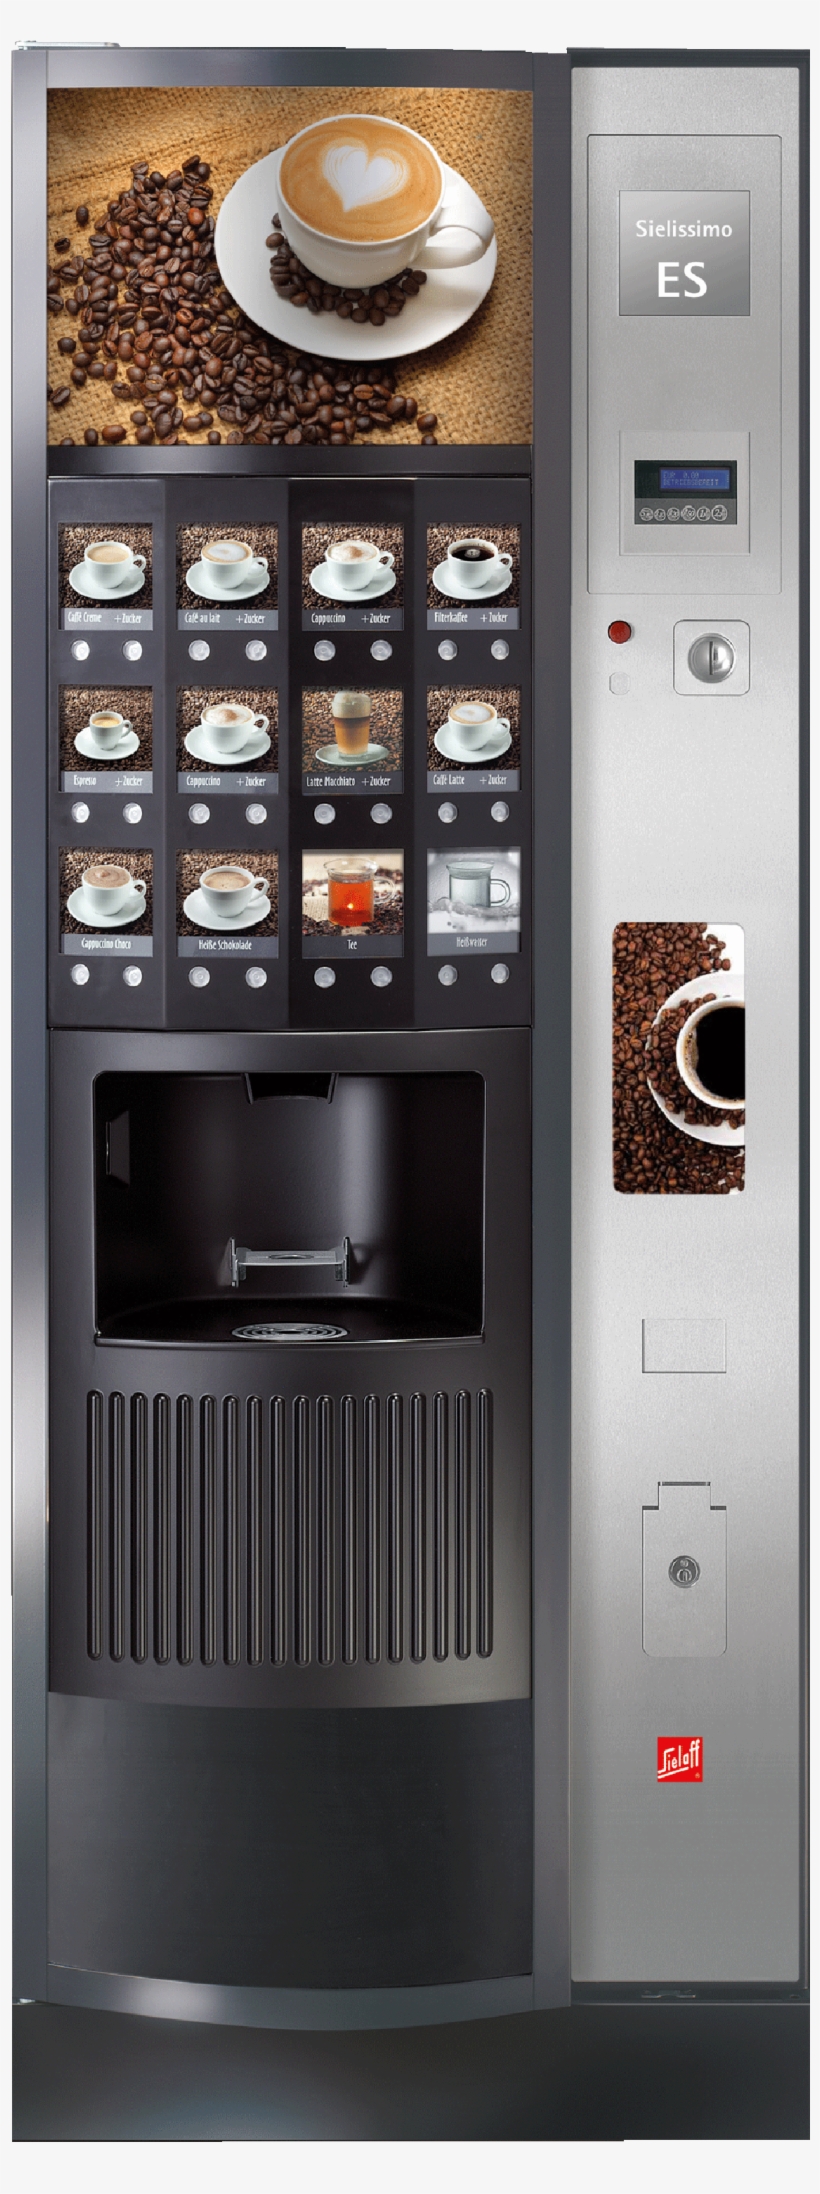 Designed Especially For Free Standing Hot Drinks Vending, transparent png #7420804